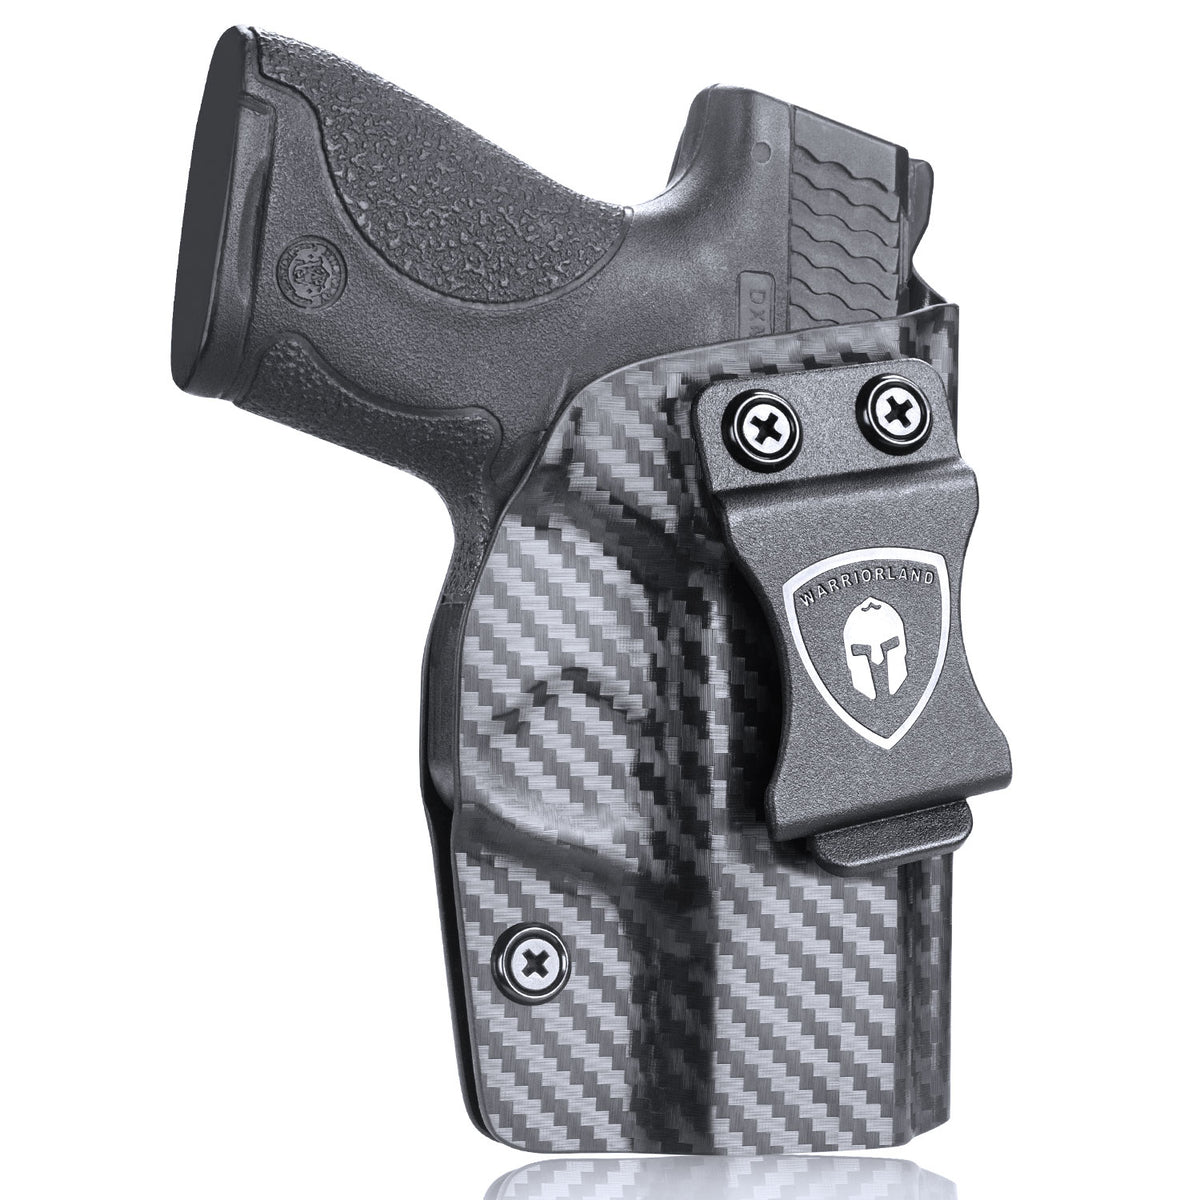 Carbon Fiber Kydex IWB Holster for Smith & Wesson M&P Shield/ Plus/ M2.0 9mm/.40 Pistol | WARRIORLAND